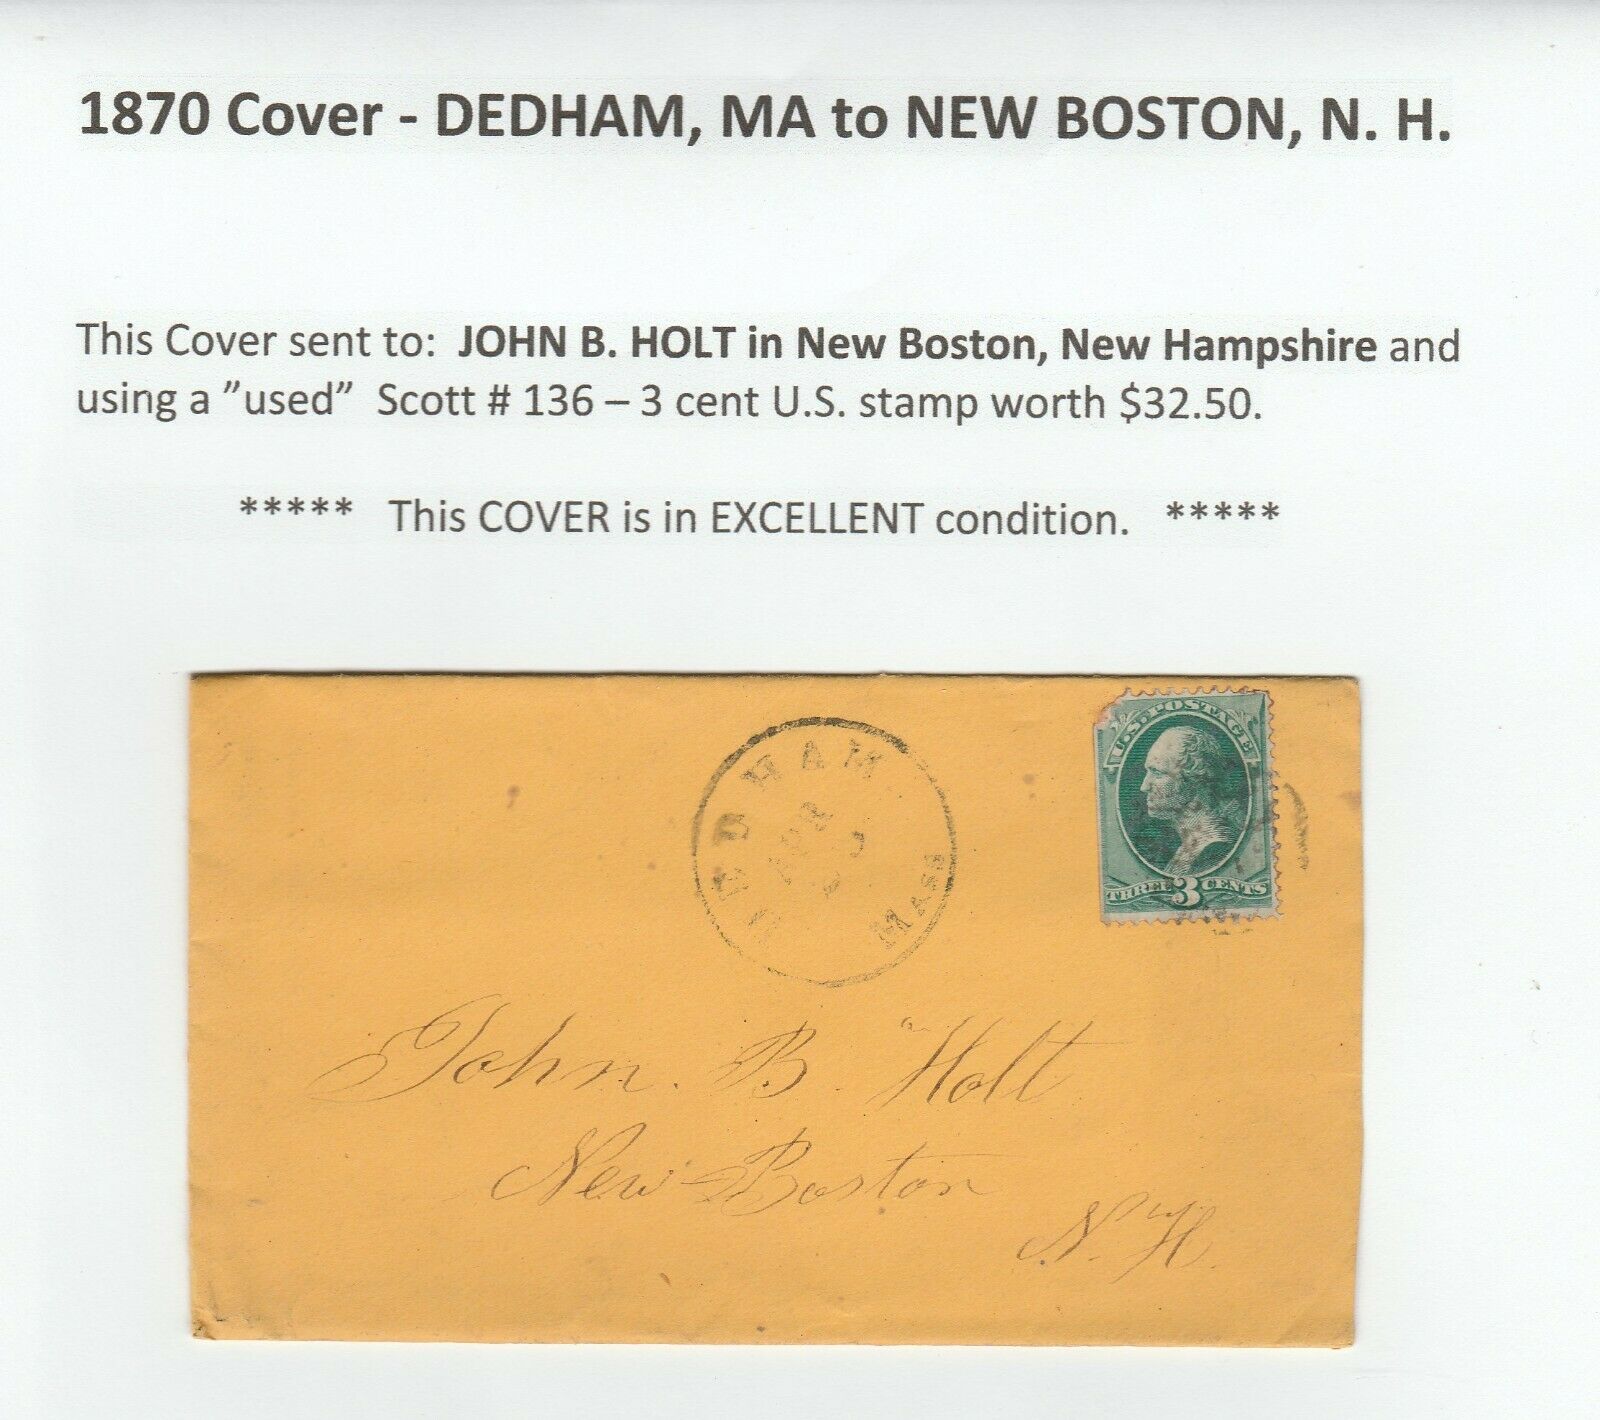 1870 Cover (only) - Dedham, Maine -to- New Boston, New Hampshire - John B. Holt